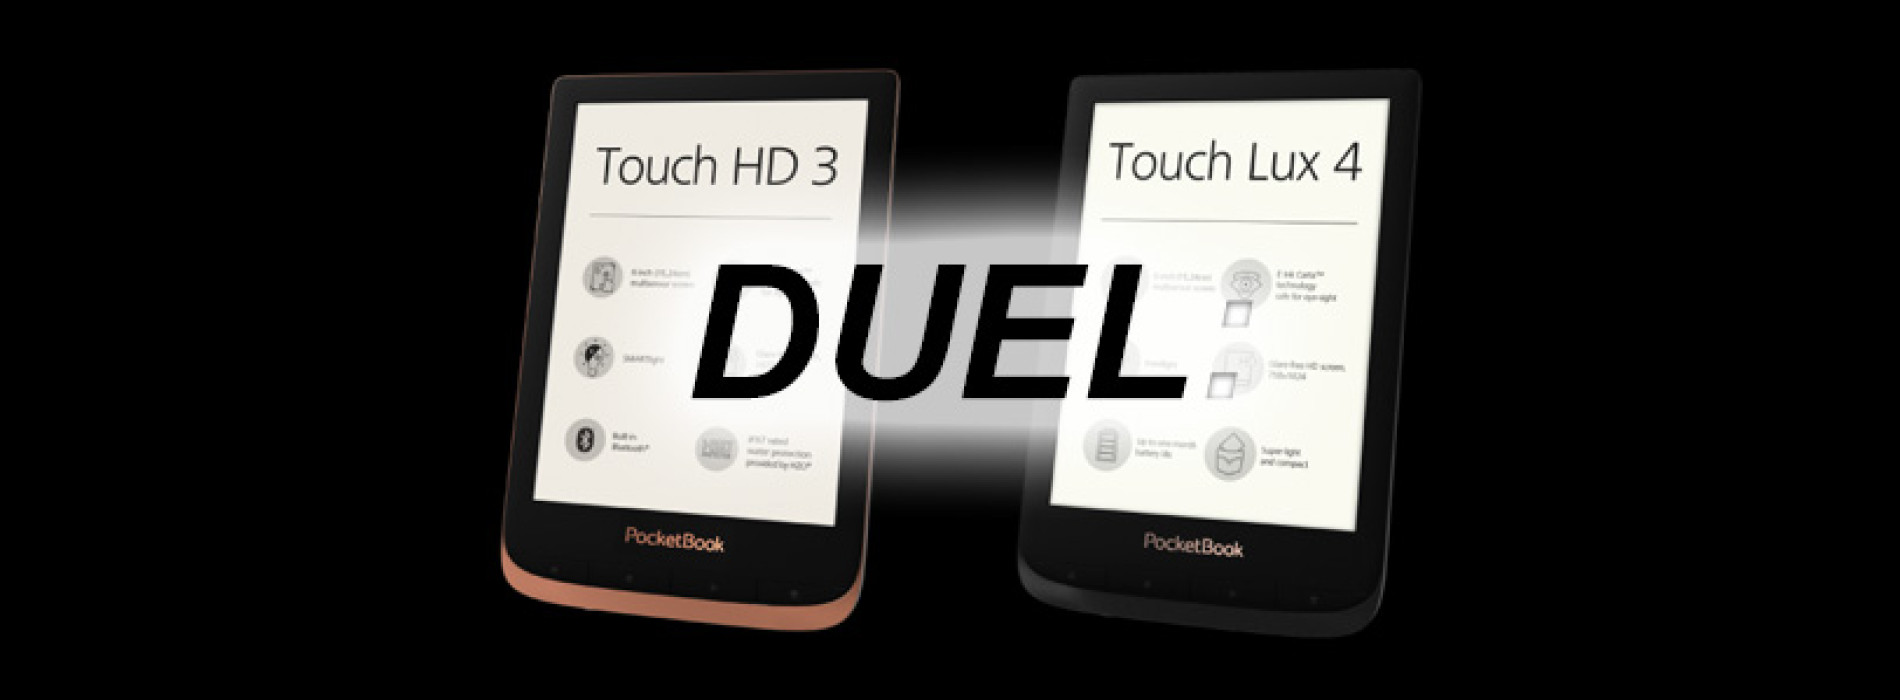 DUEL: Pocketbook Touch Lux 4 627 vs Pocketbook Touch HD3 632